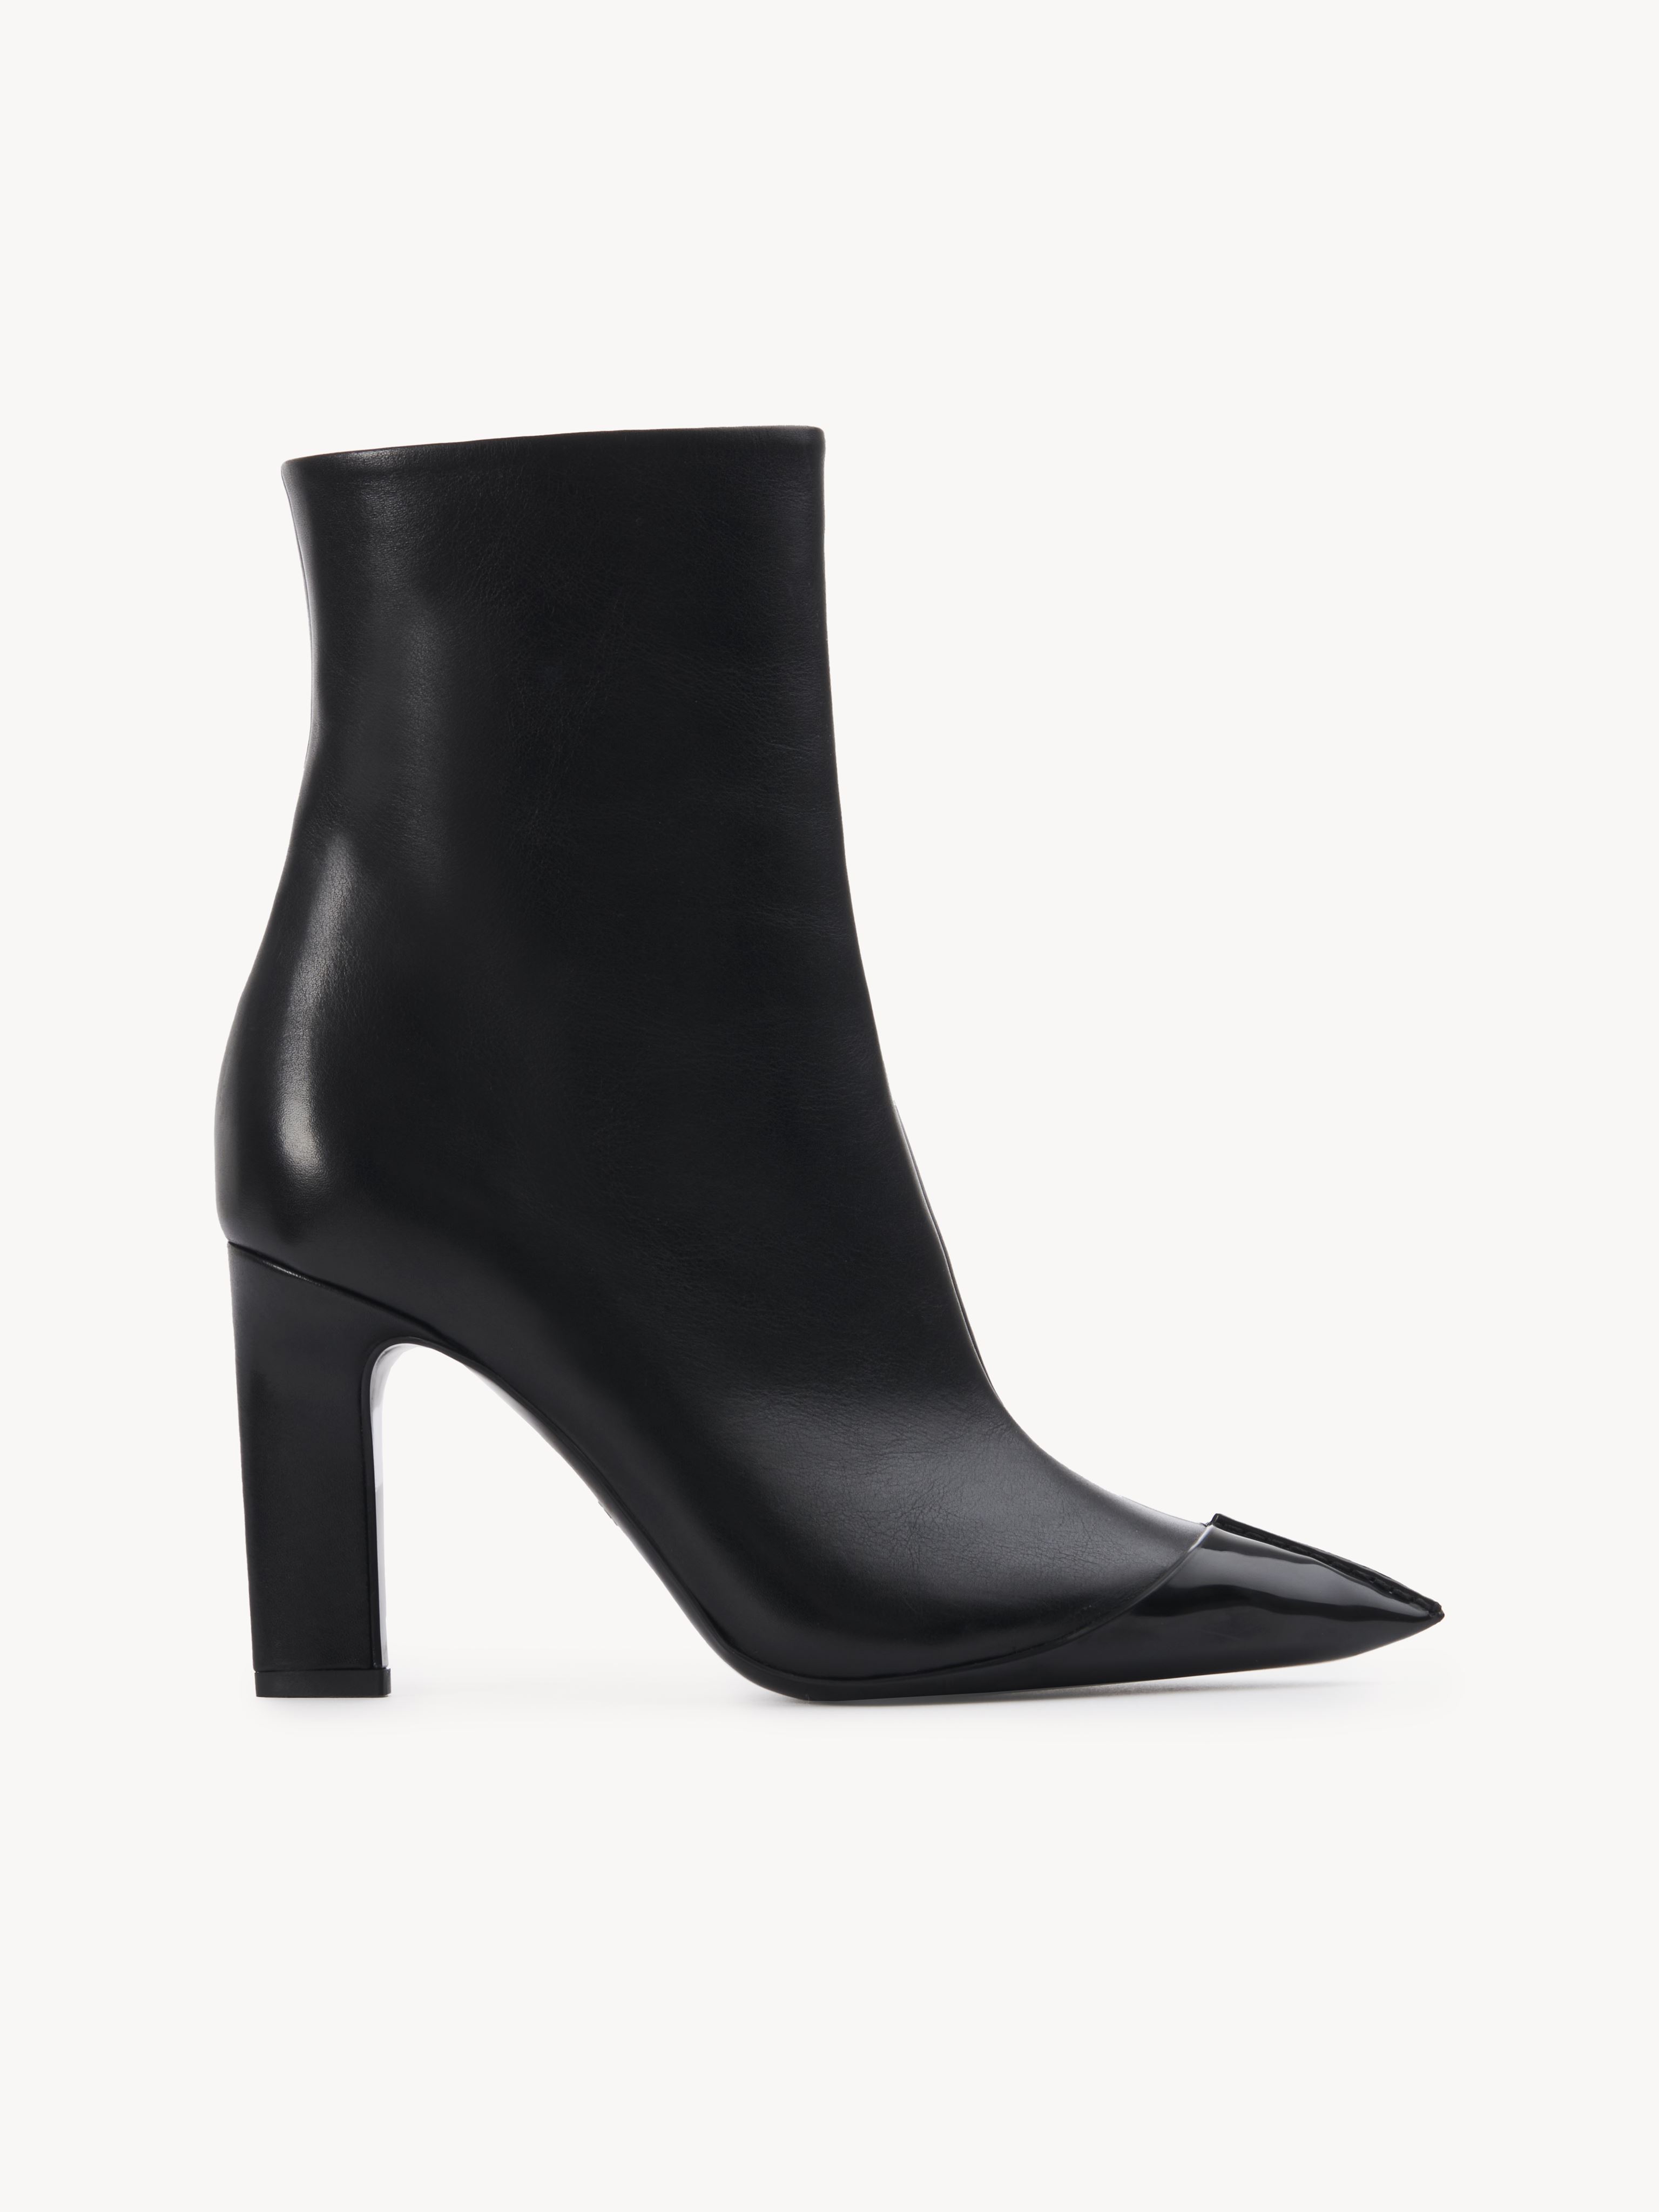 Chloé Jane Ankle Boot Black Size 5.5 100% Calf-skin Leather